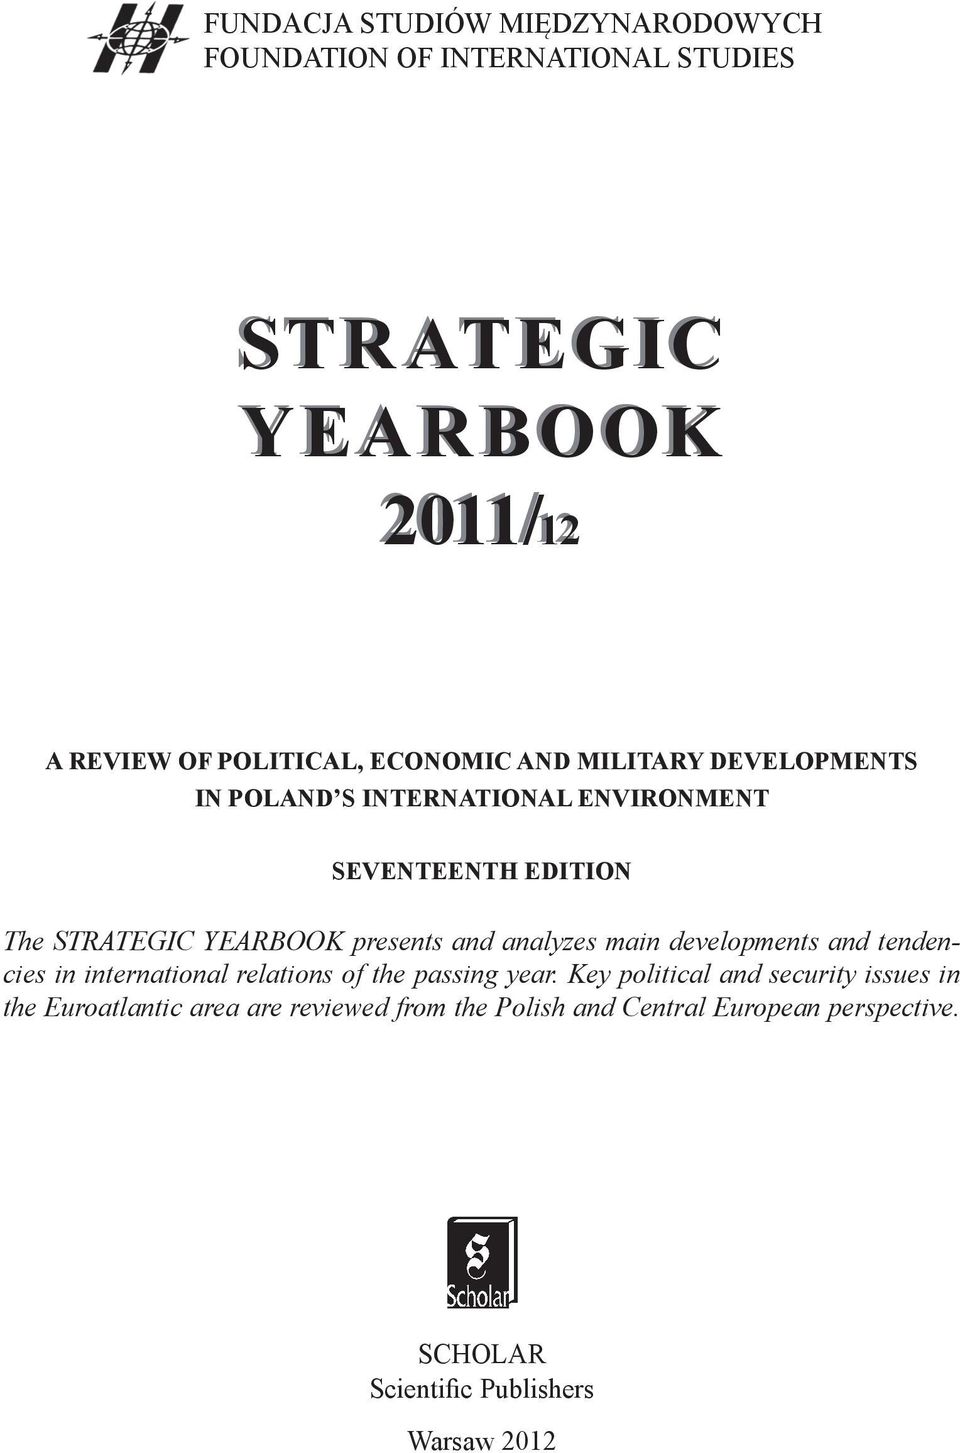 and analyzes main developments and tendencies in international relations of the passing year.